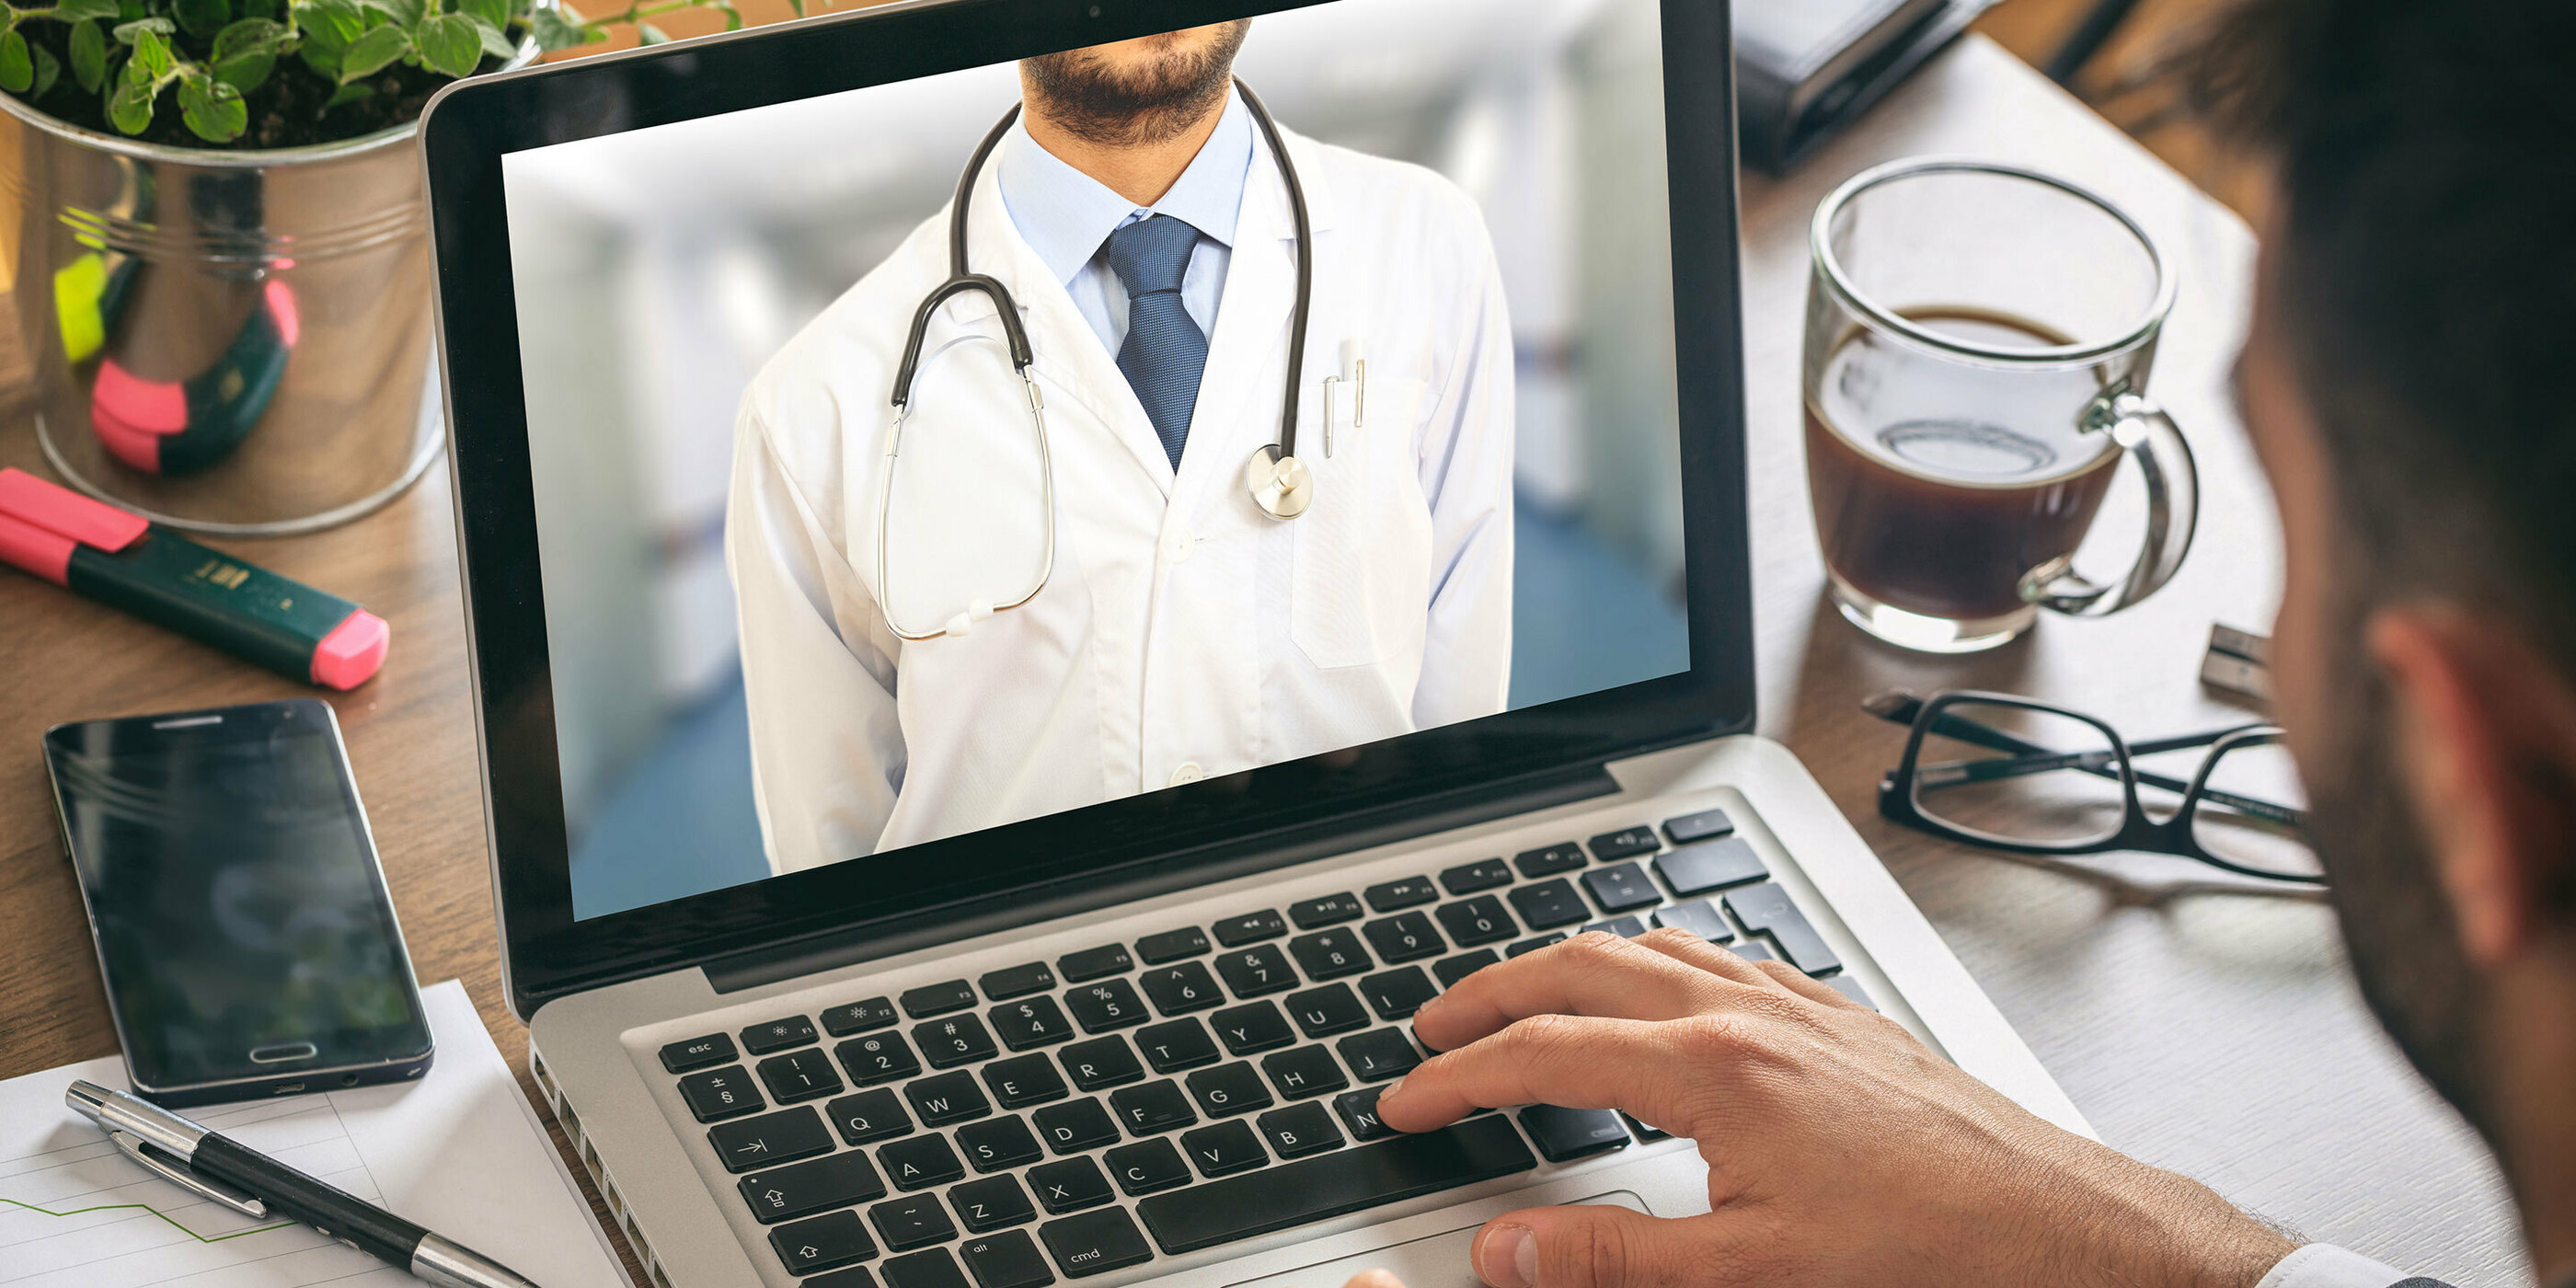 How To Market Virtual Doctor Appointment Services to Acquire New Patients